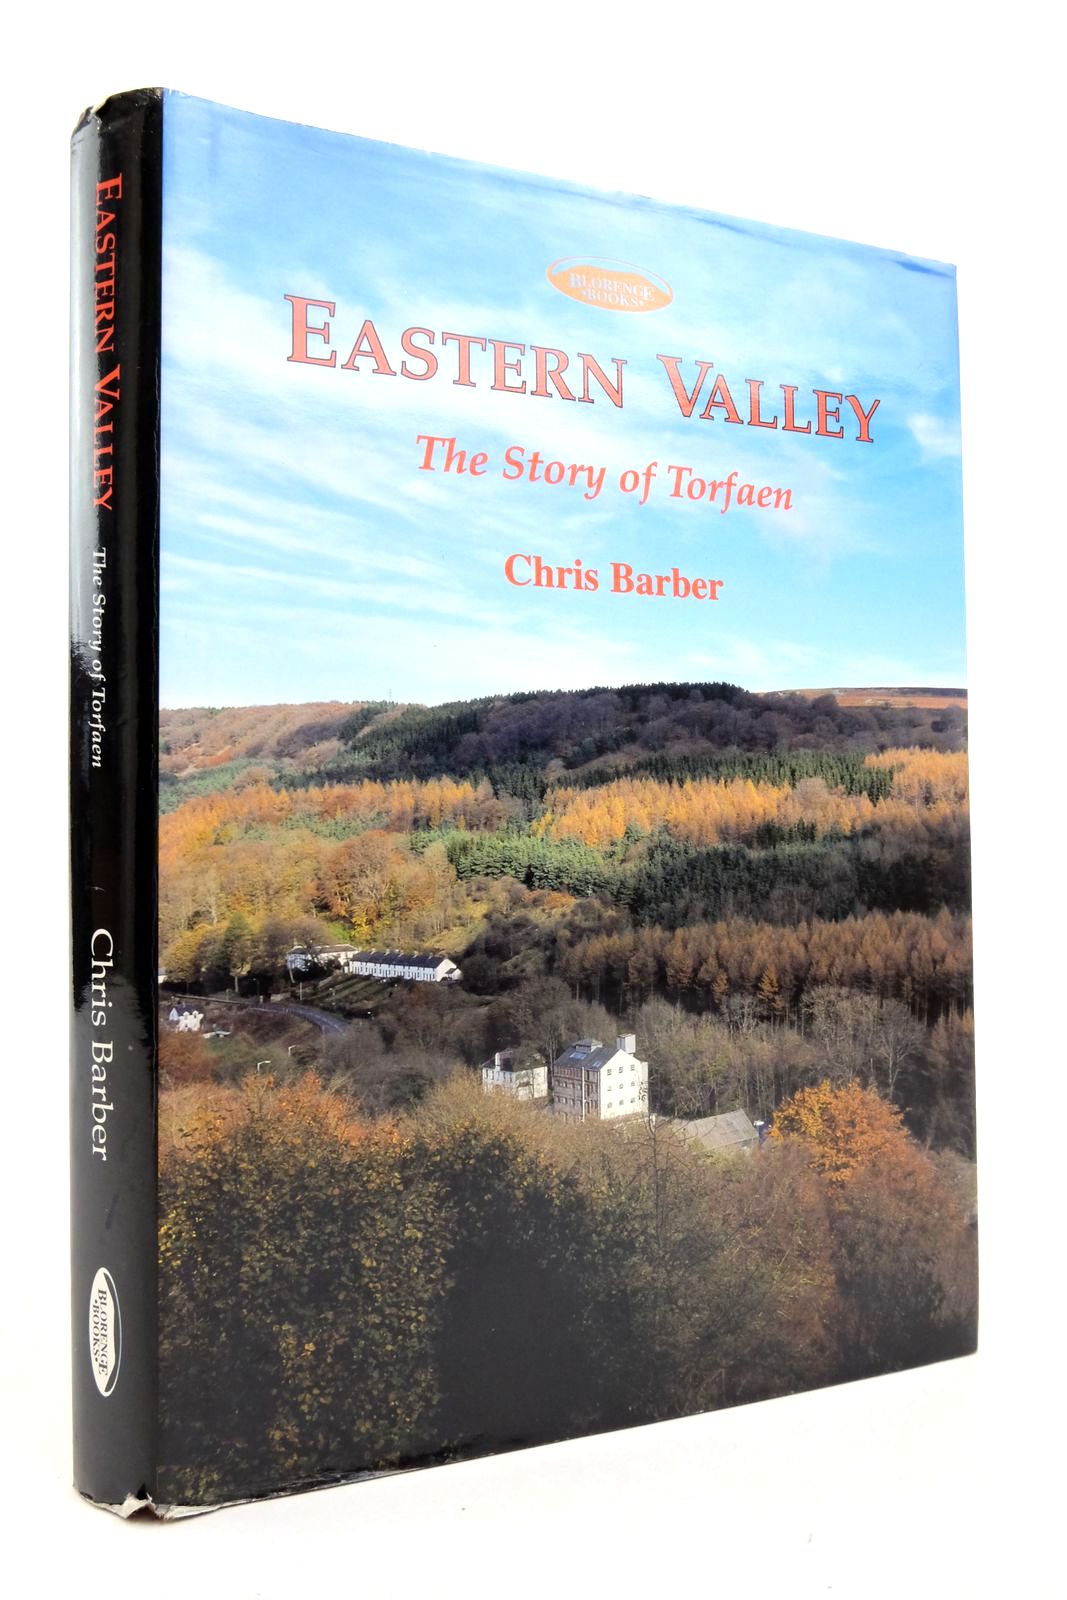 Photo of EASTERN VALLEY: THE STORY OF TORFAEN written by Barber, Chris published by Blorenge Books (STOCK CODE: 2136763)  for sale by Stella & Rose's Books